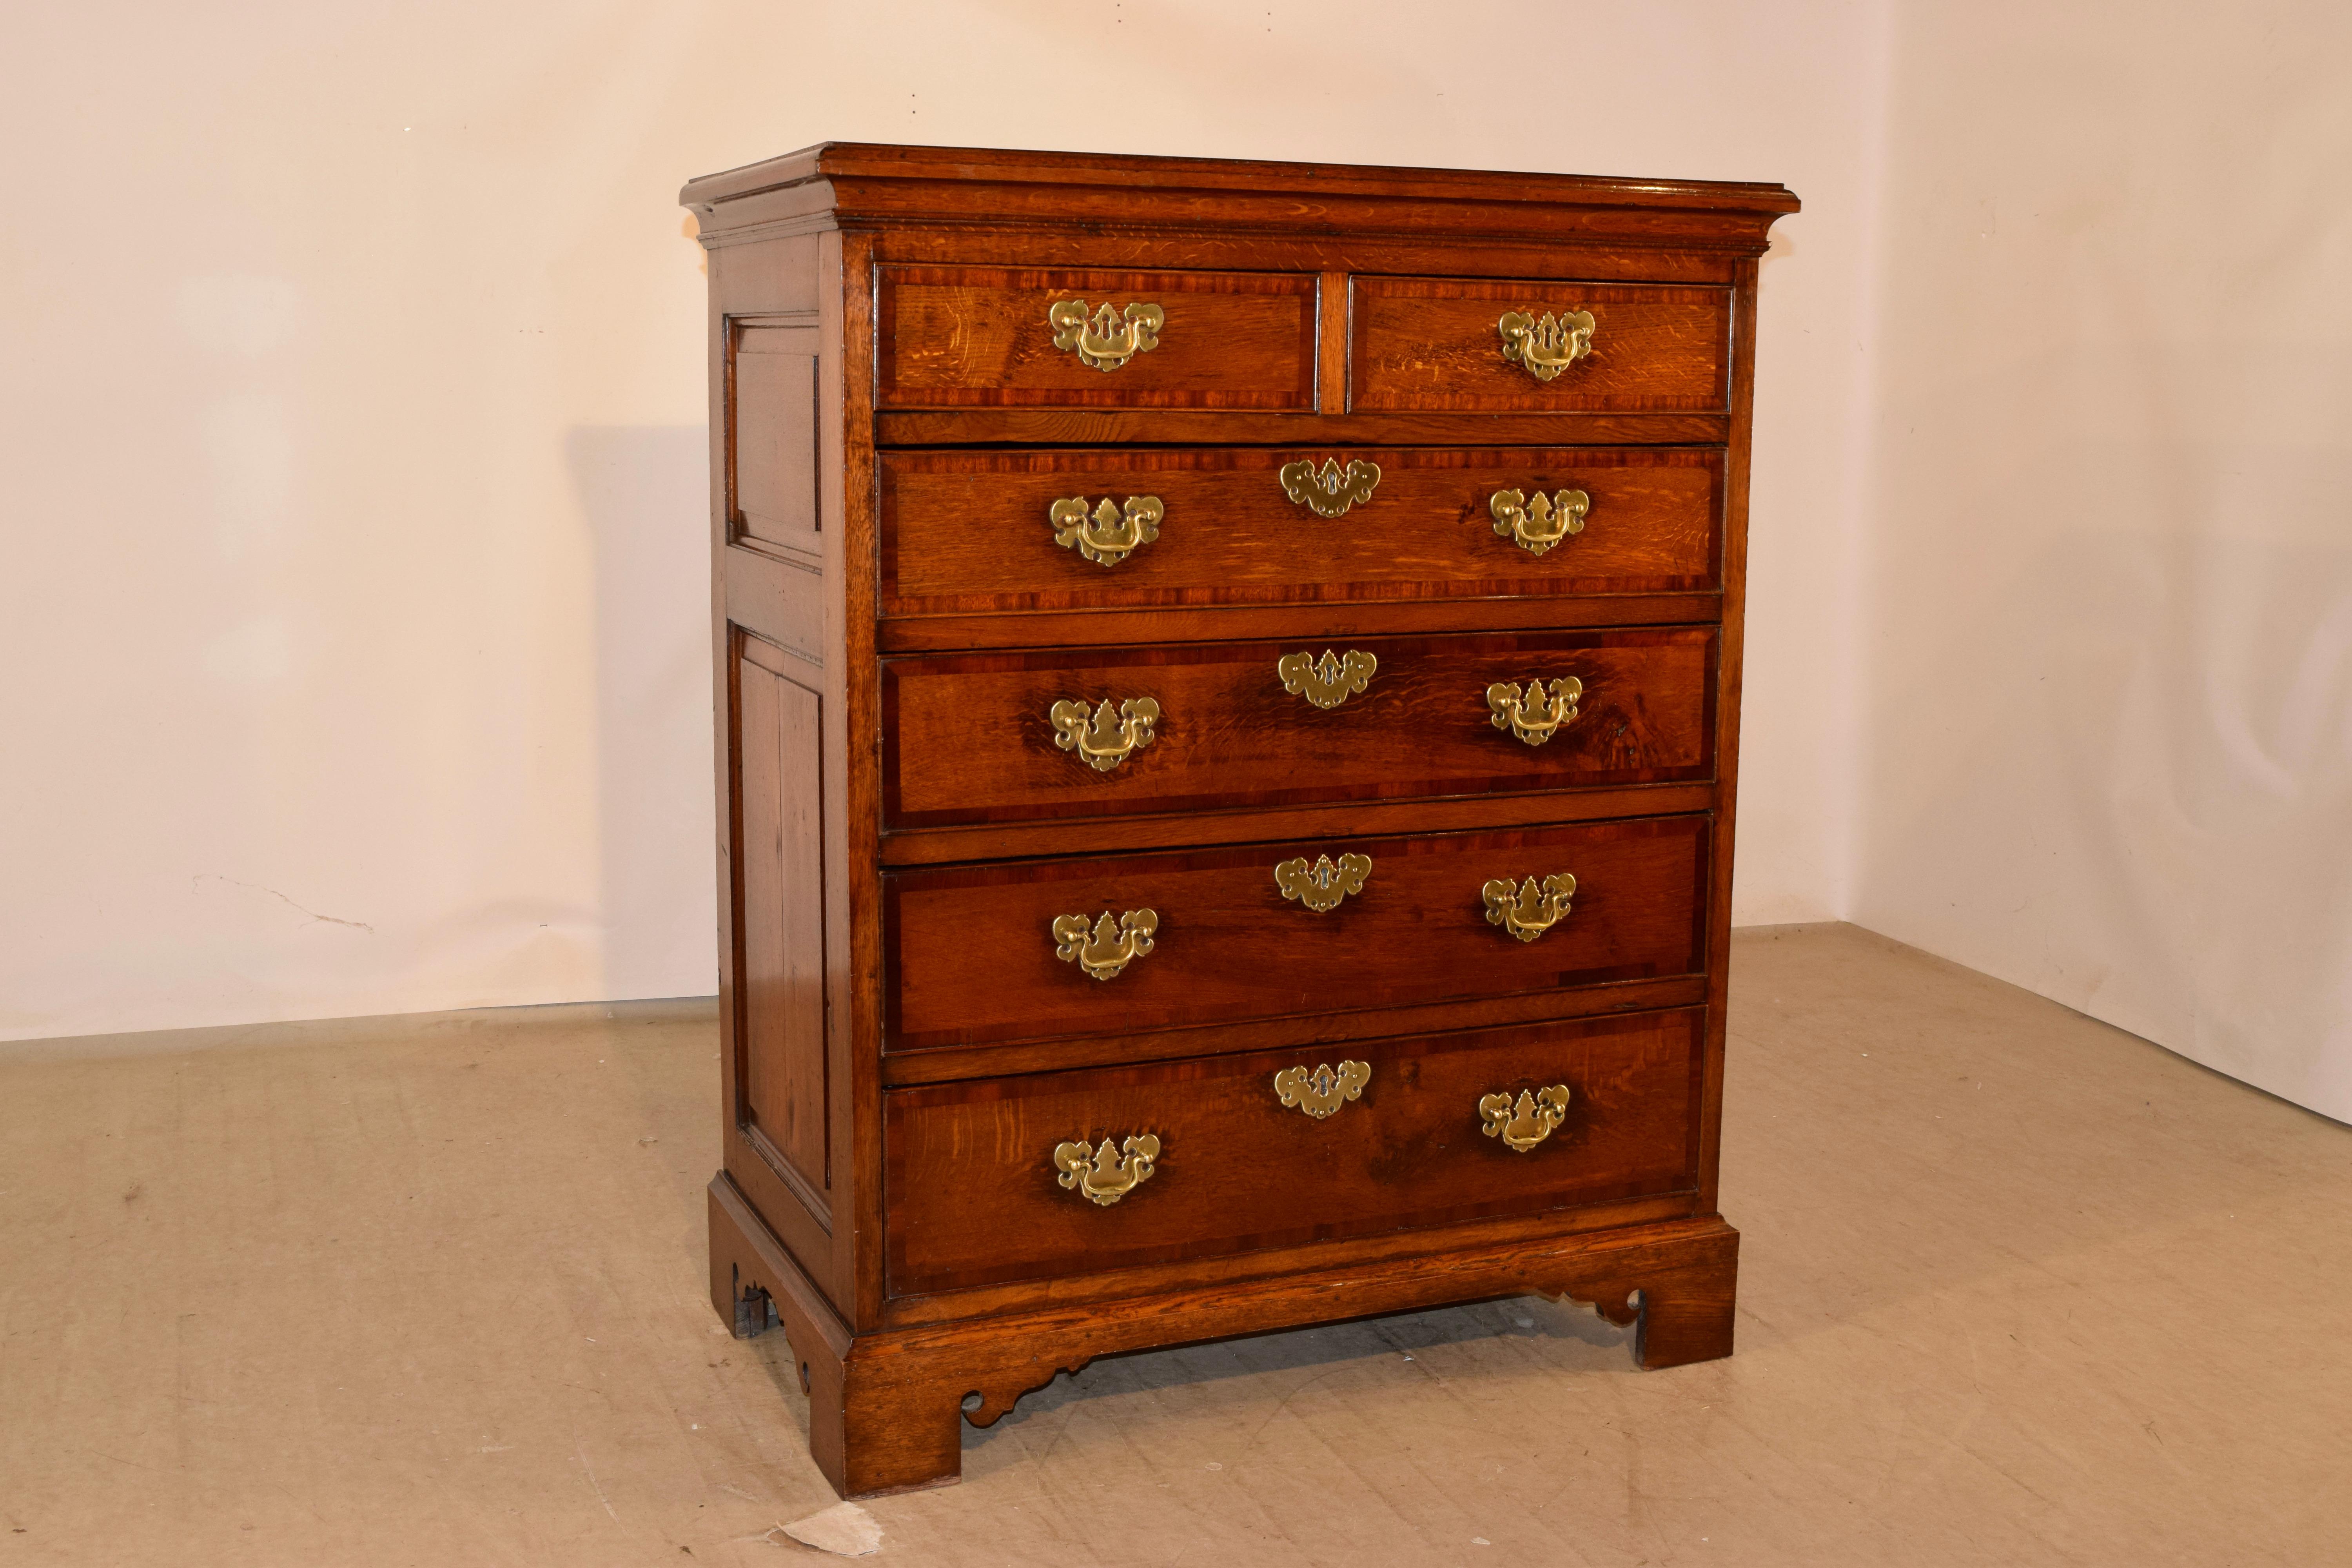 18th century oak and mahogany stunning chest of drawers from the Lancashire region of England. The top has a beveled edge and is banded in fine mahogany. This follows down to raised paneled sides and two over four drawers, all of the drawer fronts